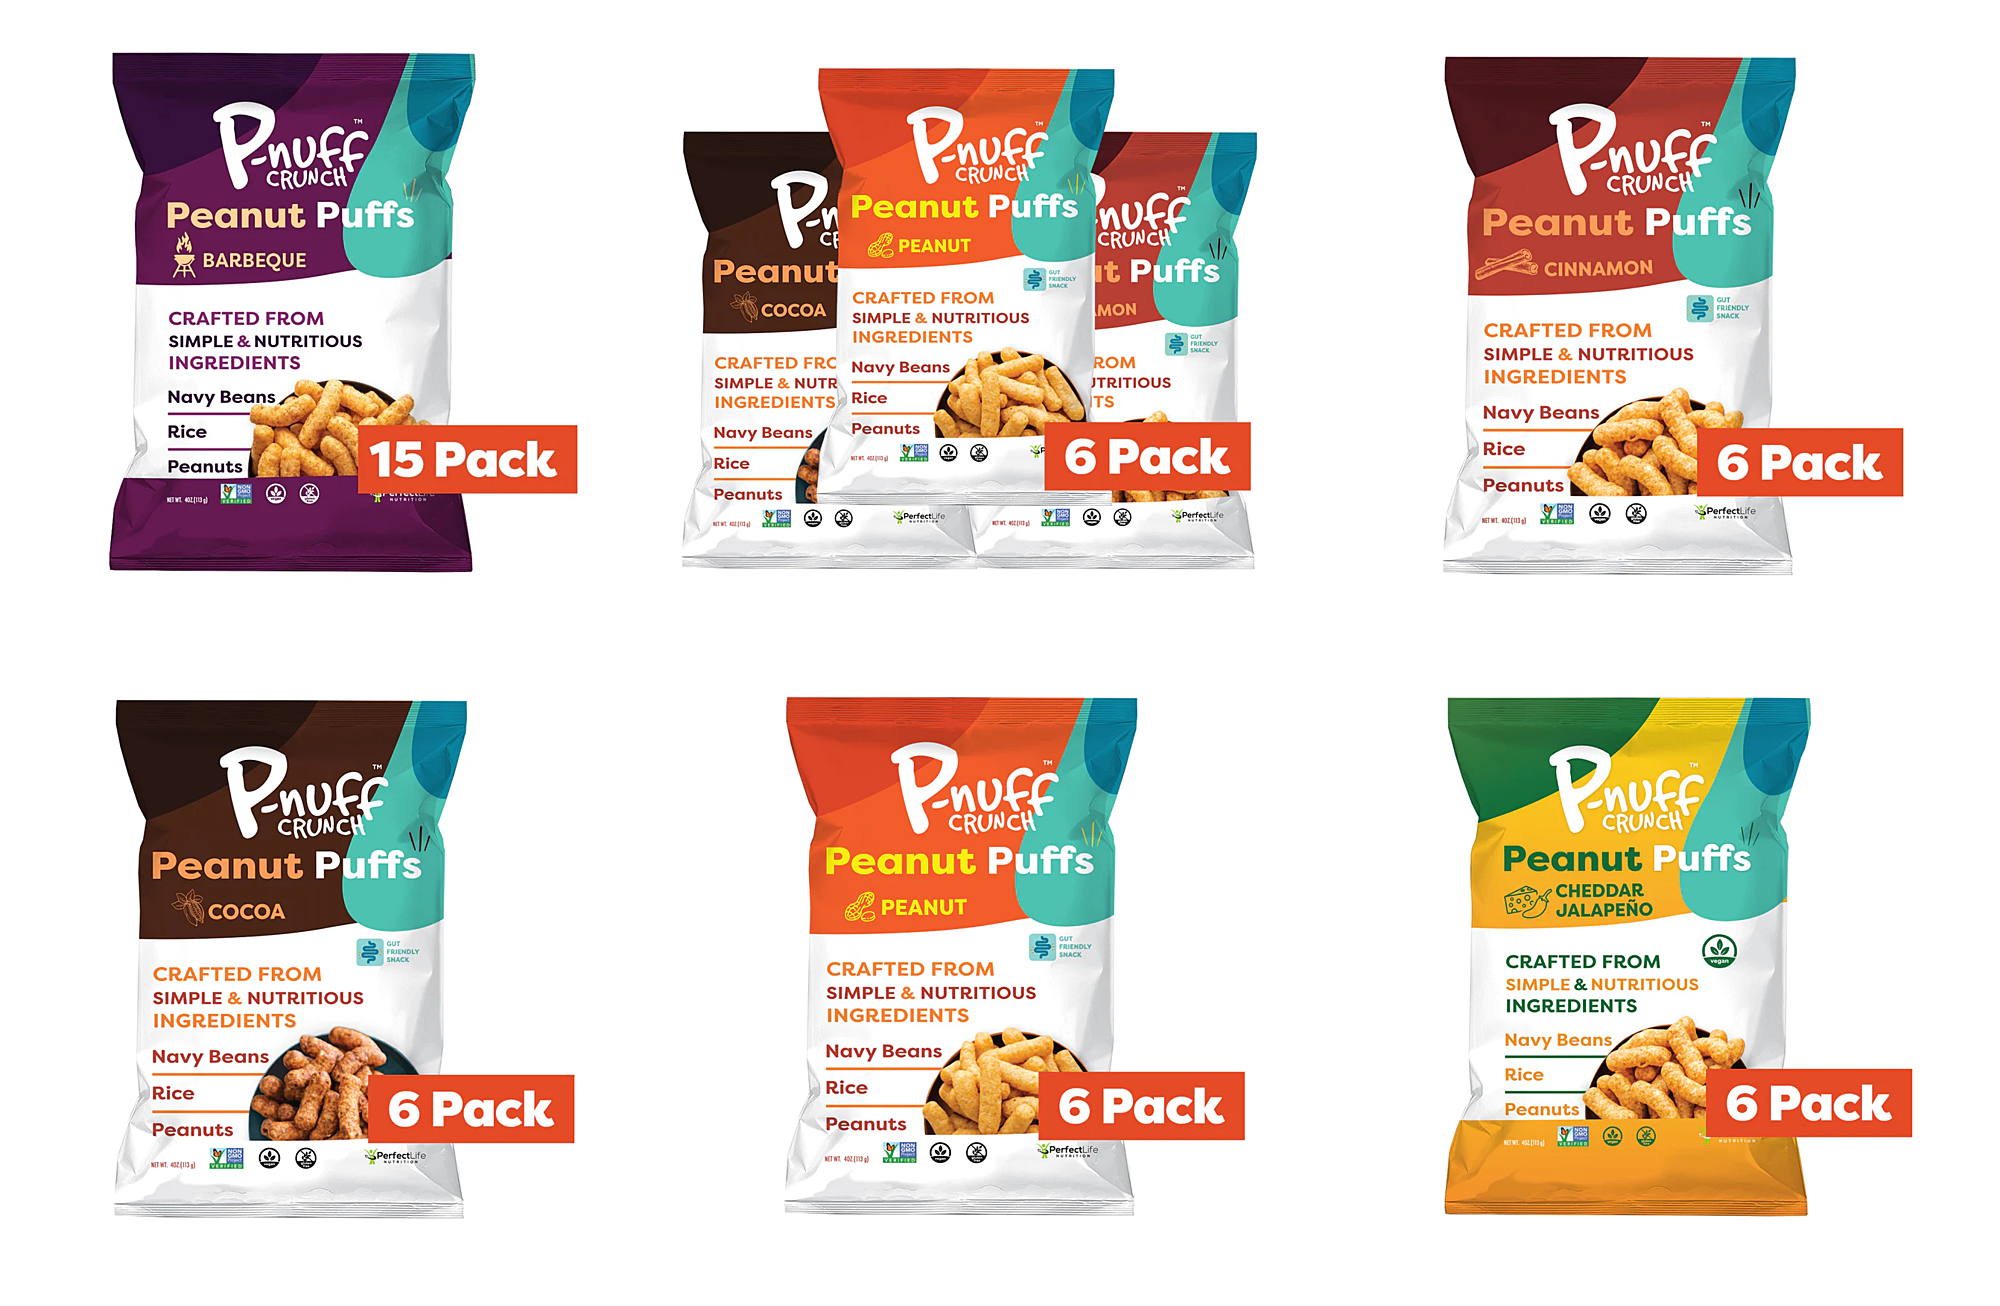 P-nuff Crunch snacks are delicious and wholesome protein puffs 